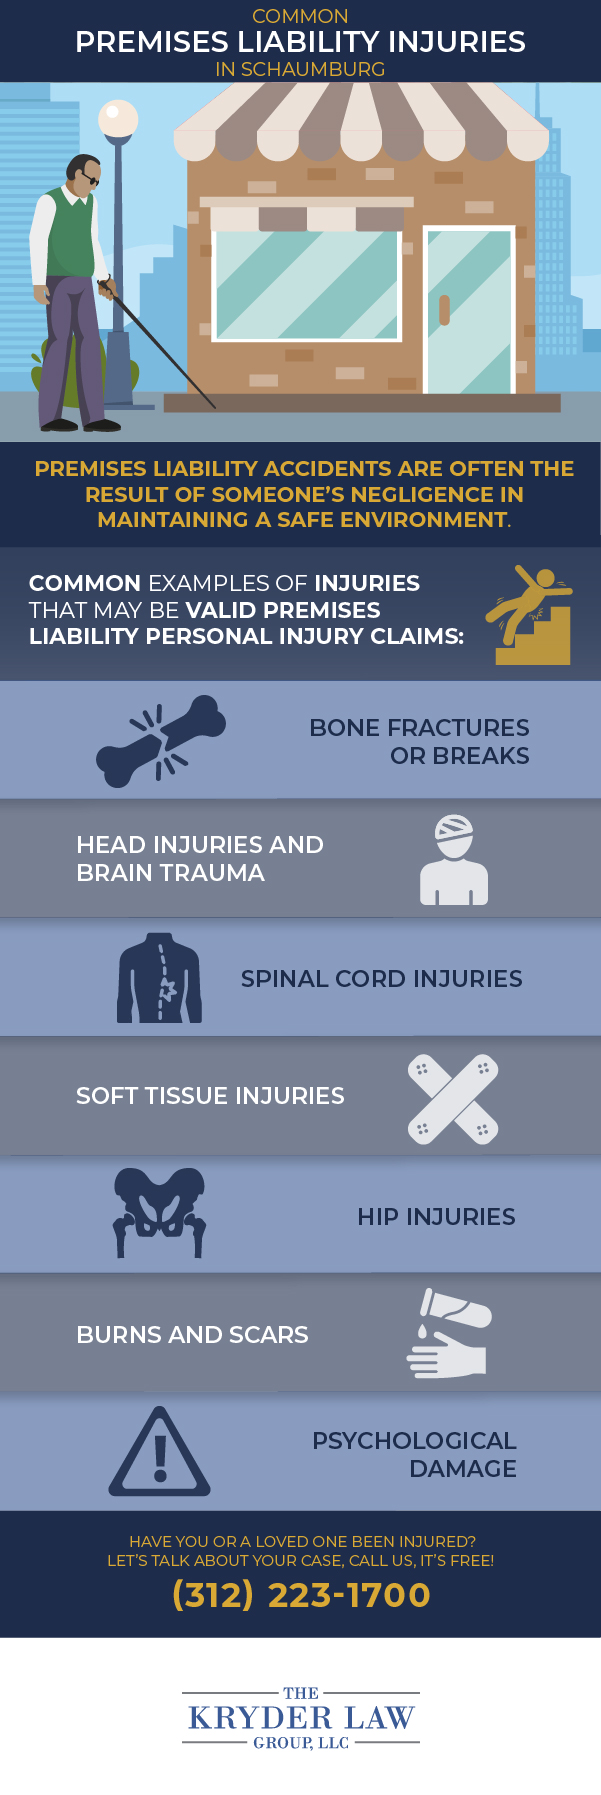 Common Premises Liability Injuries in Schaumburg